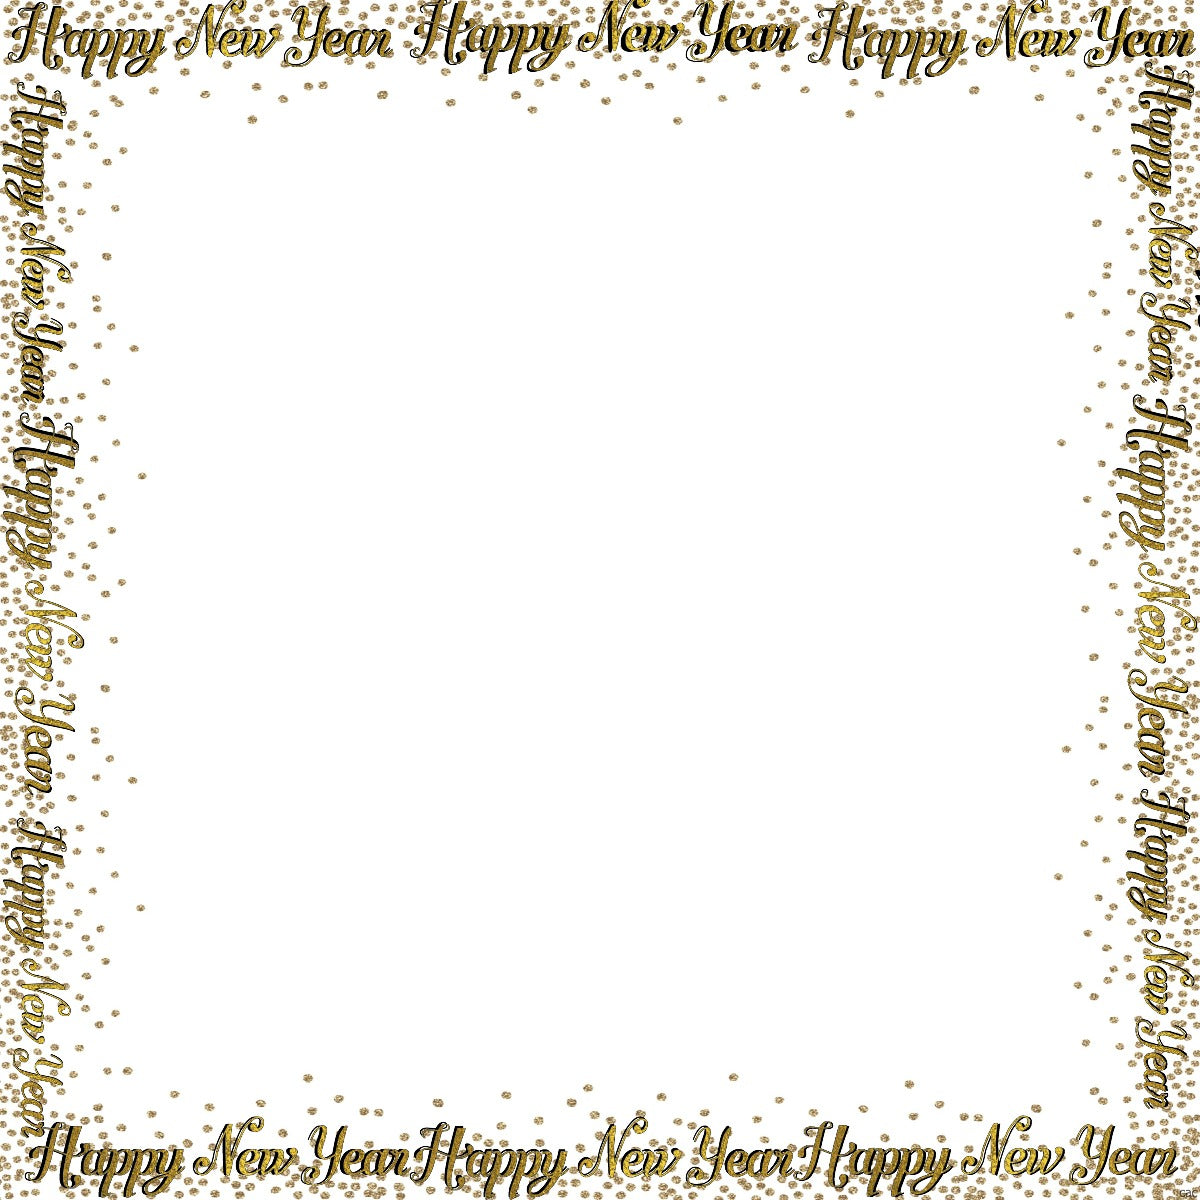 Happy New Year 12x12 Background or Scrapbook Page Printable